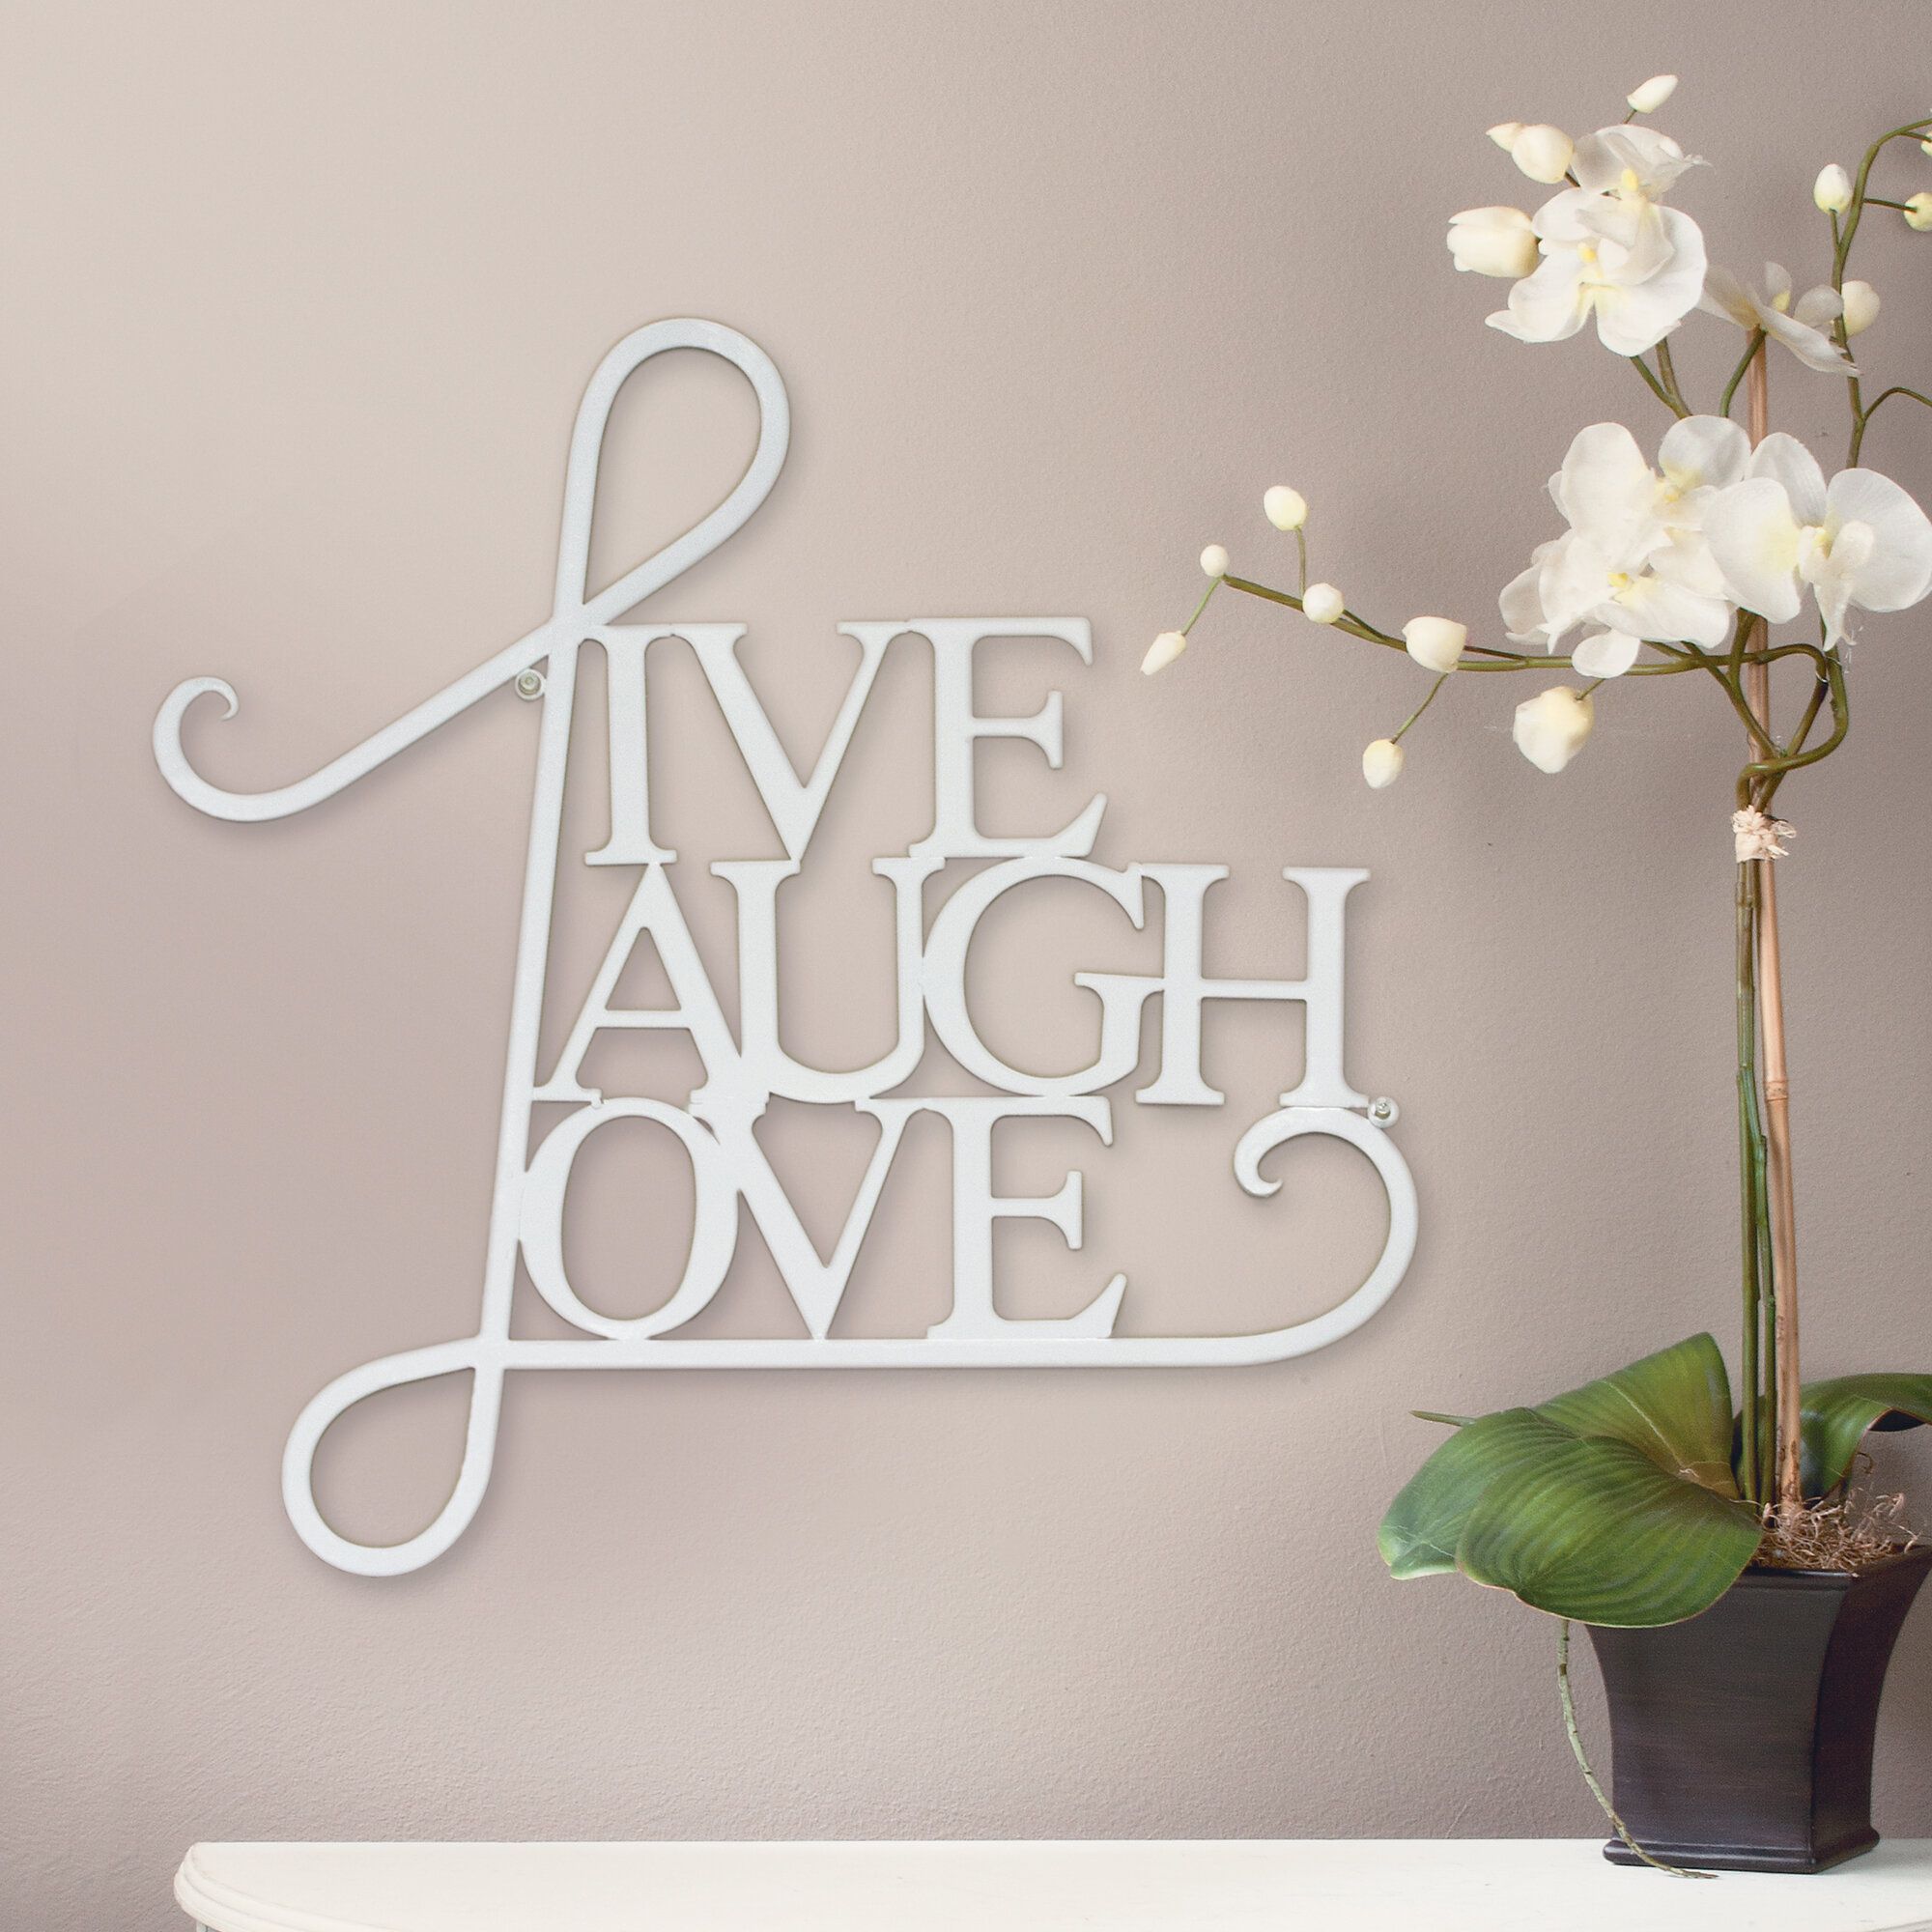 White Antler Wall Decor | Wayfair In Live, Laugh, Love Antique Copper Wall Decor (View 7 of 30)